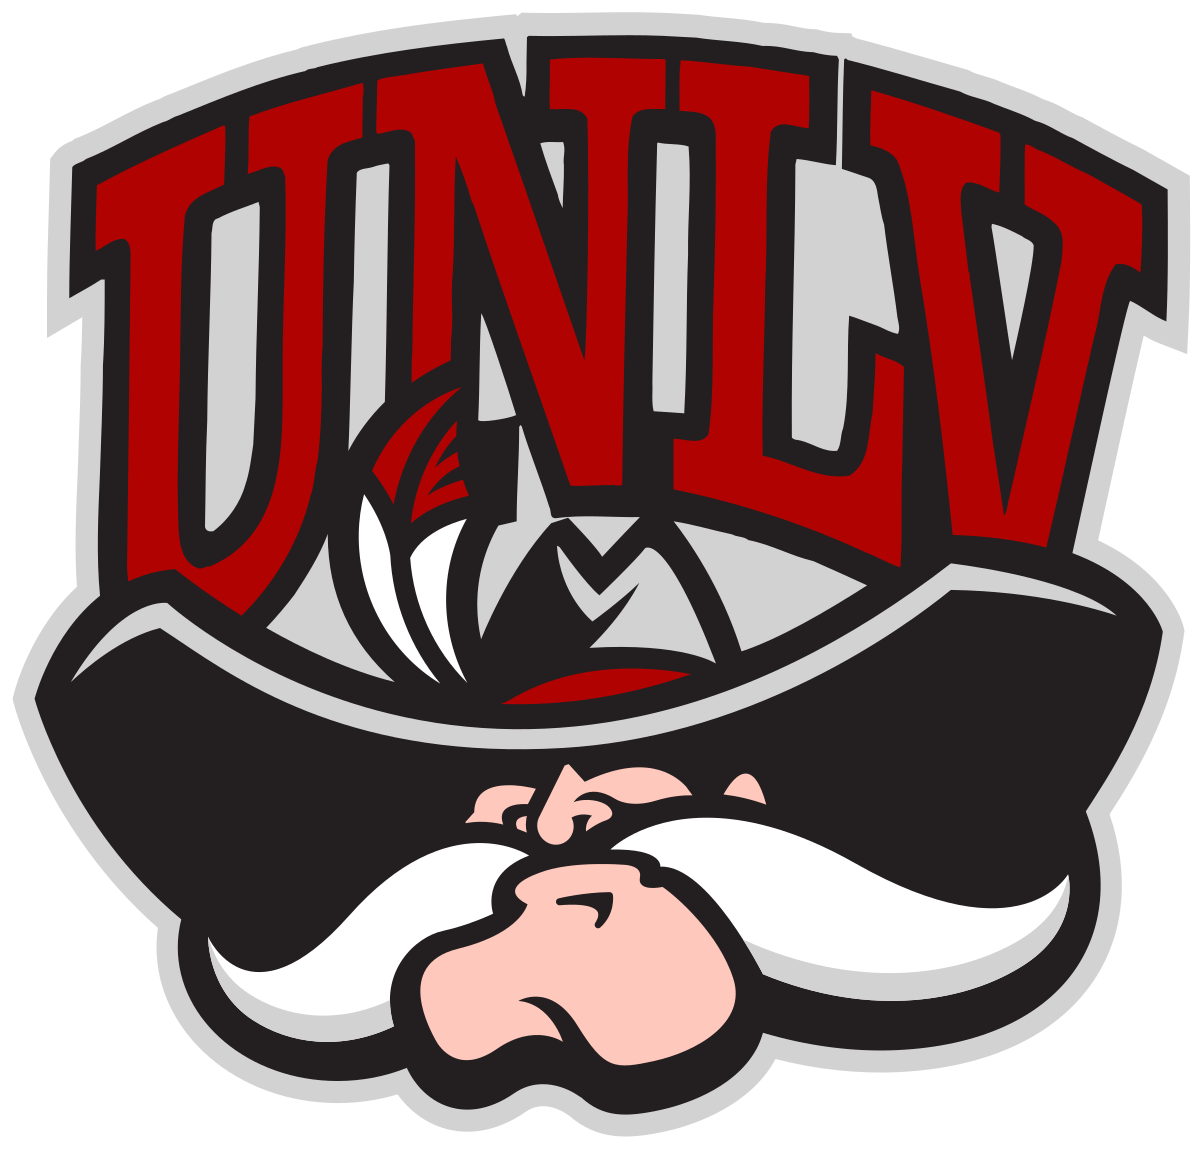 UNLV Logo - New UNLV logo has a giant mustache flowing majestically among